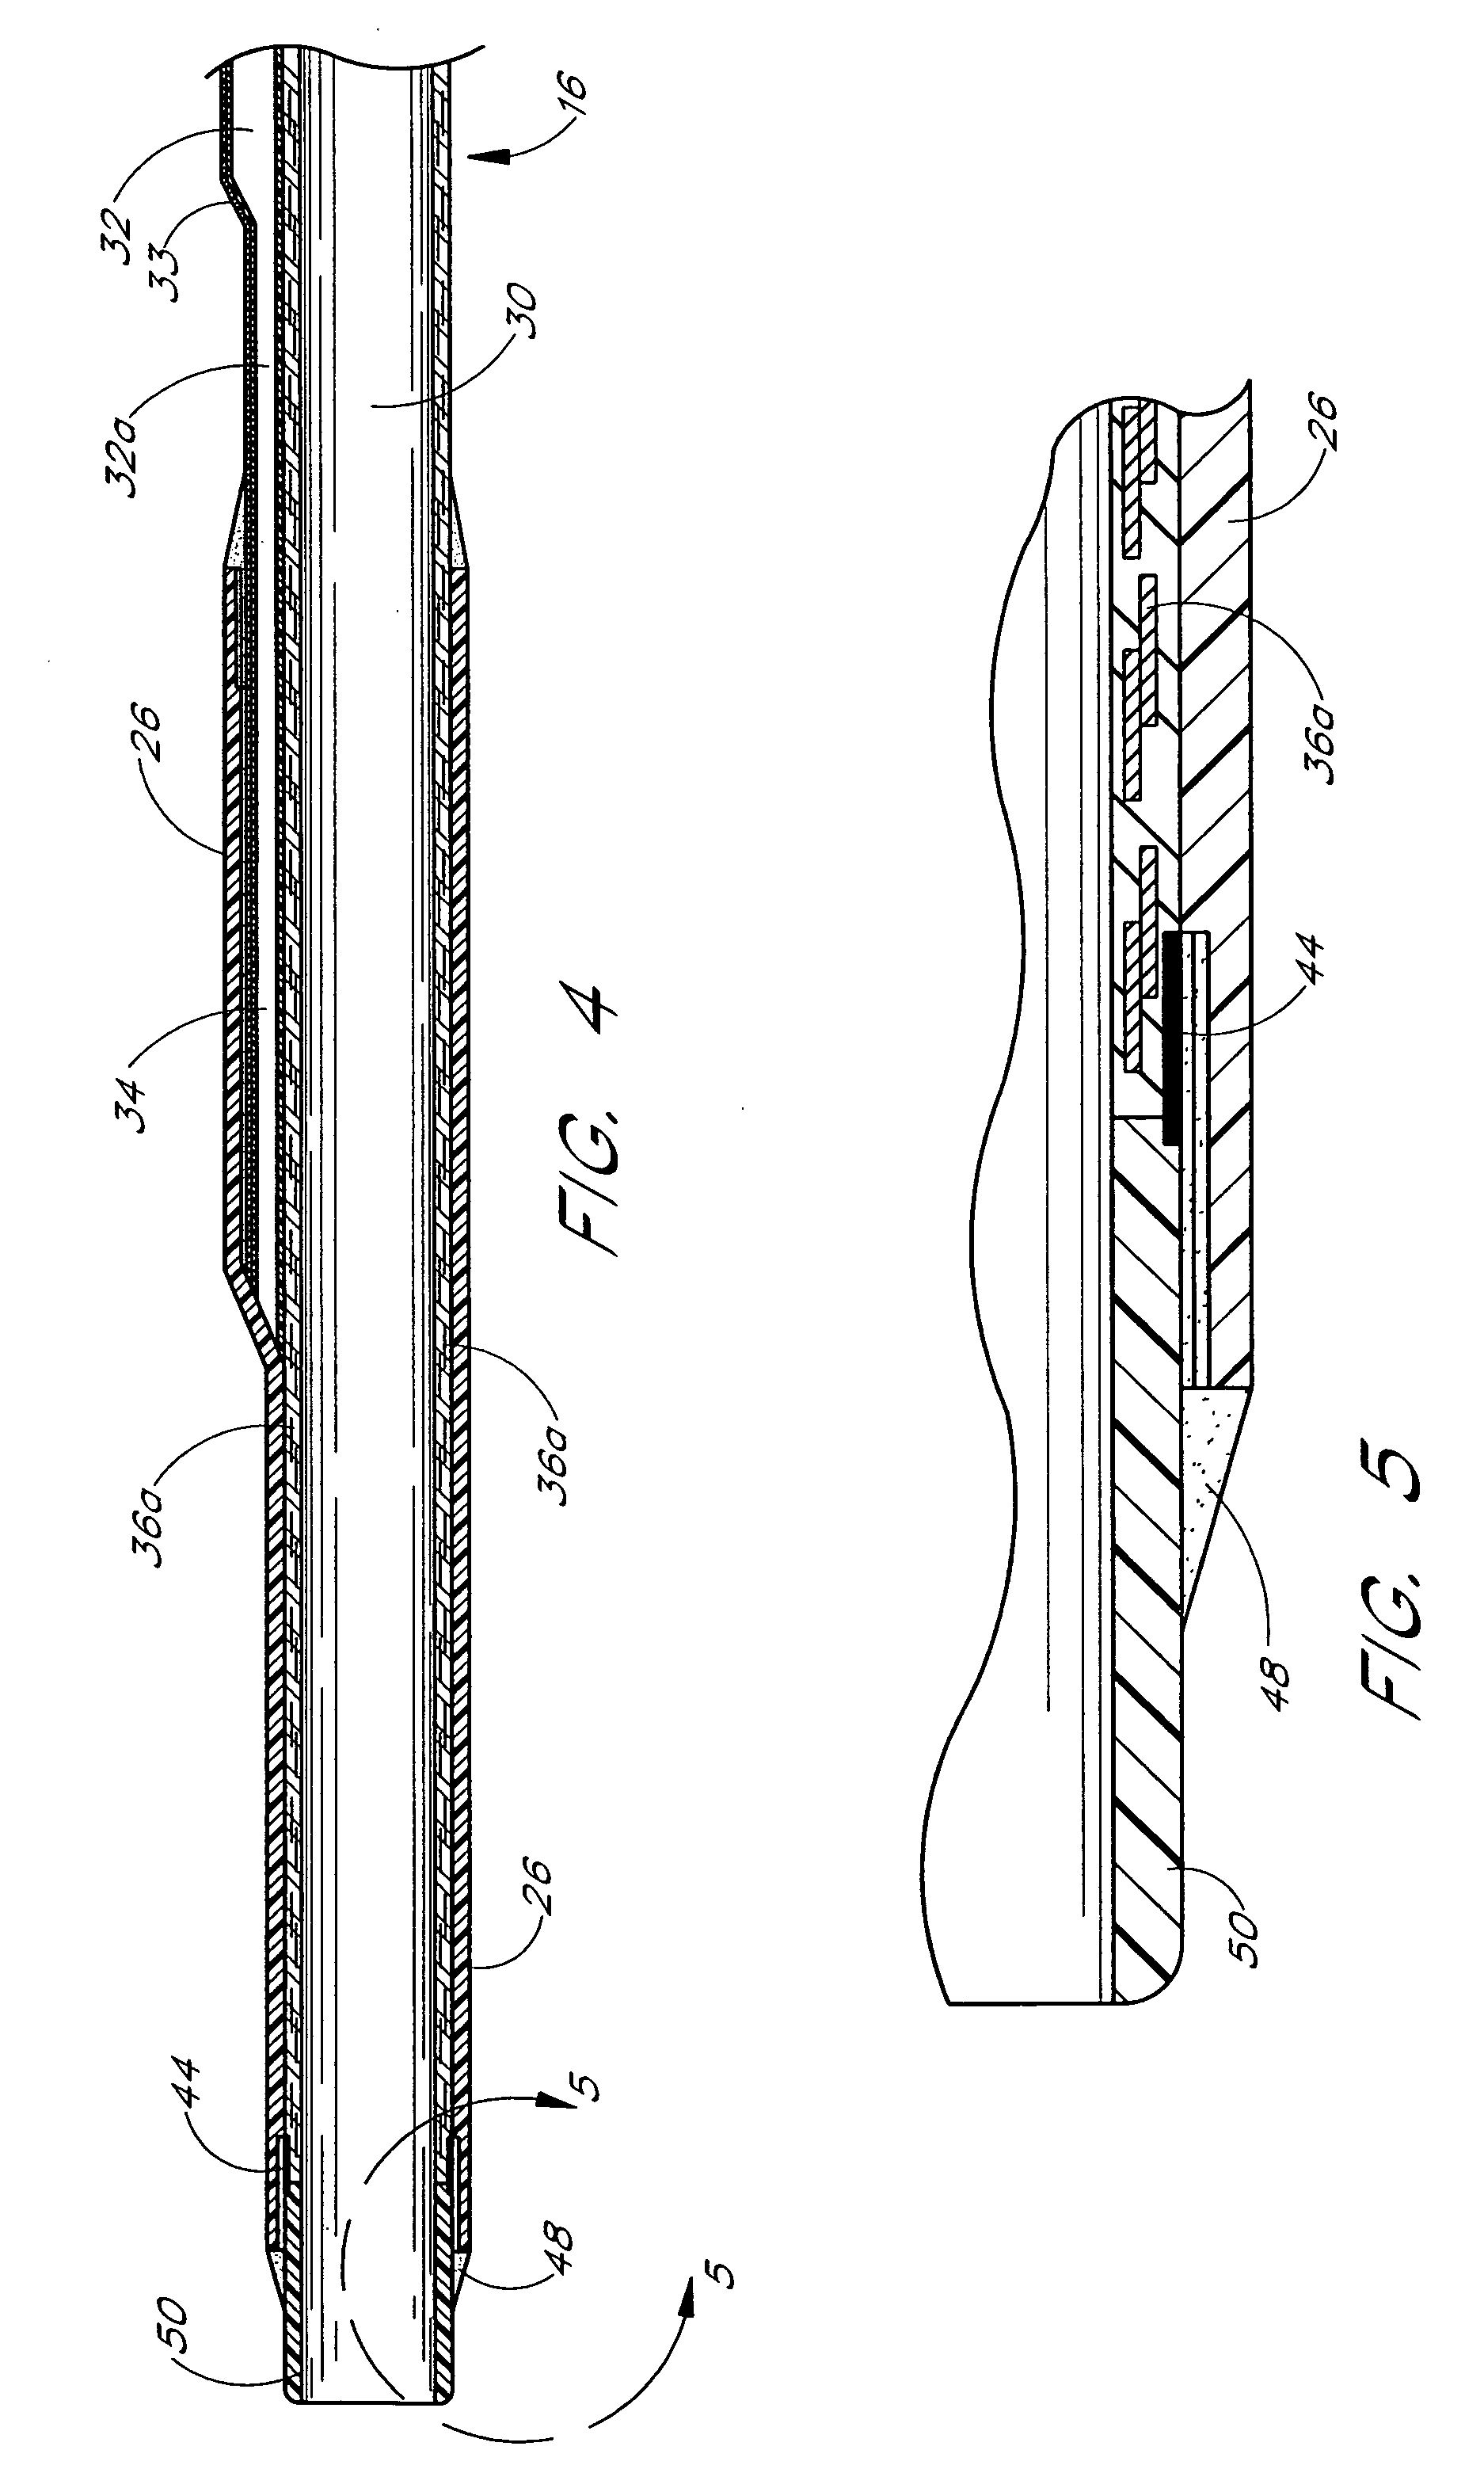 Method and apparatus for emboli containment